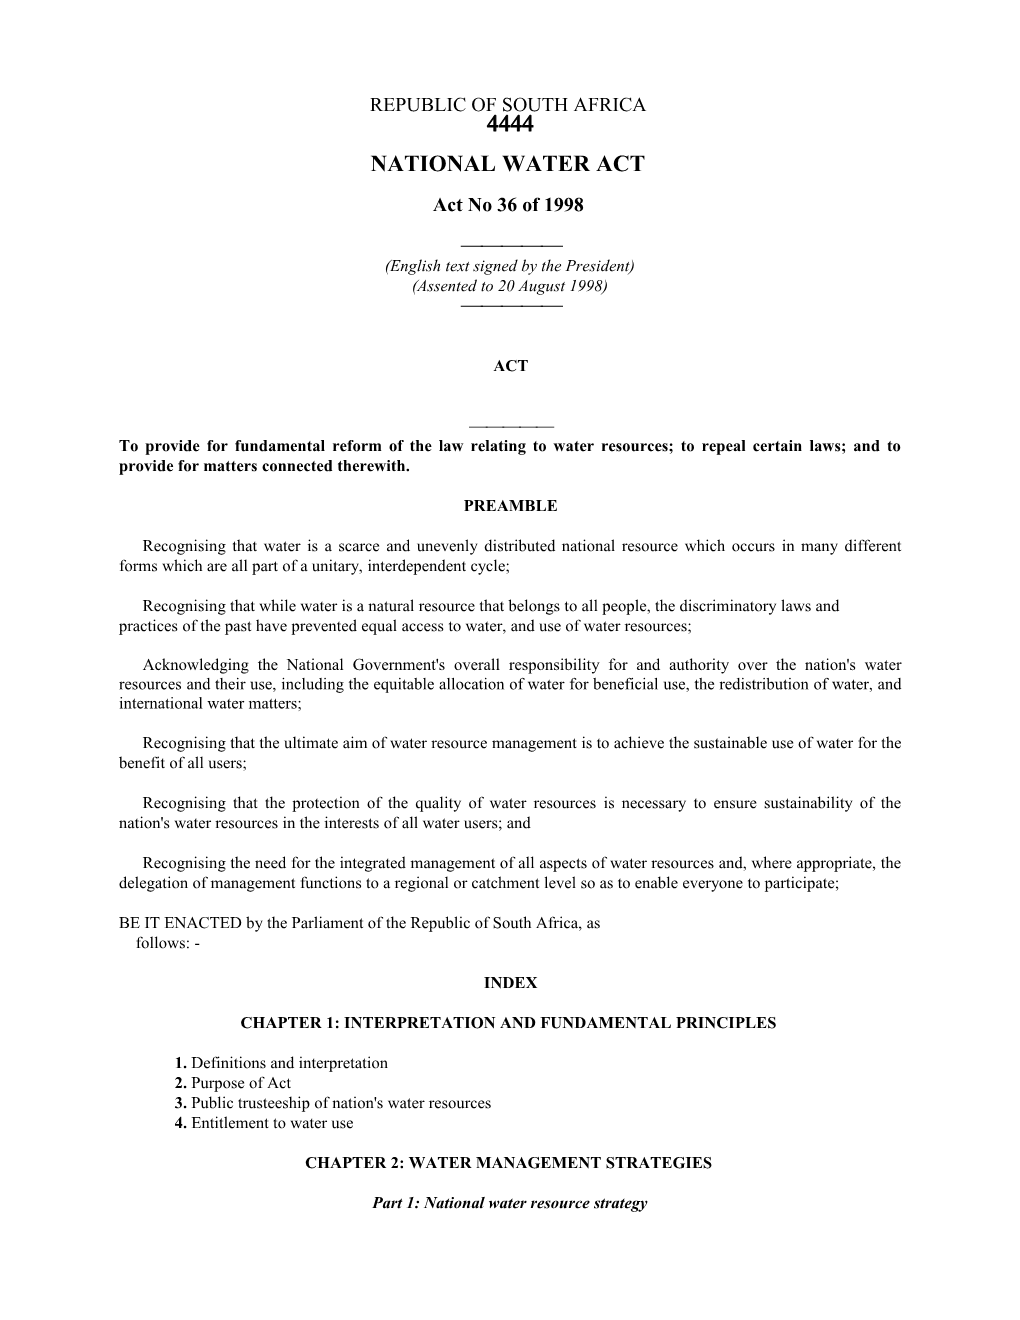 National Water Act